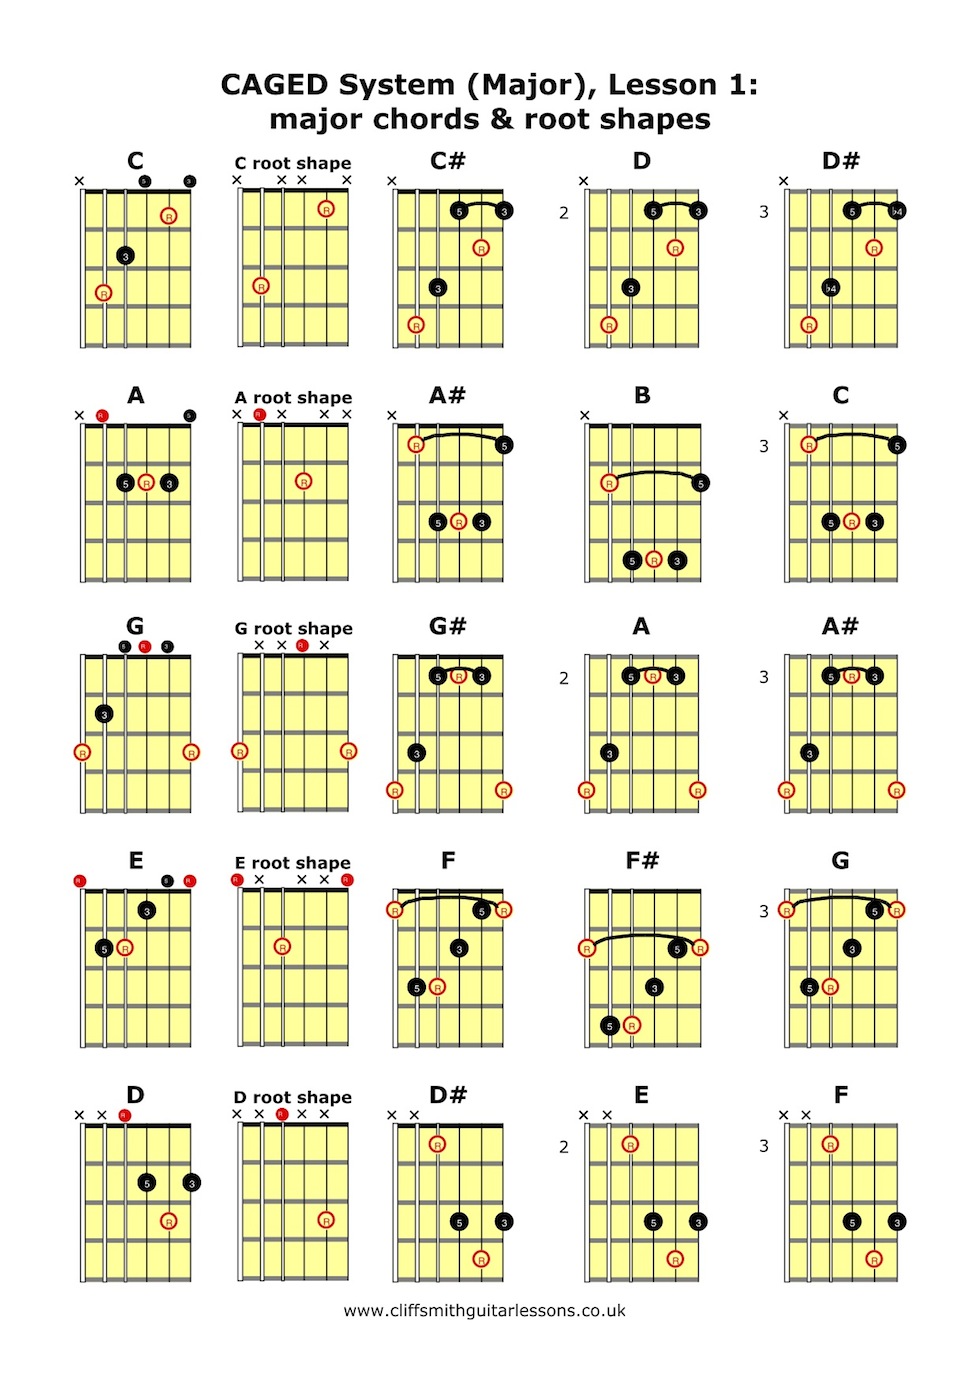 CAGED major chords and root shape diagrams. Free download from Cliff Smith Guitar Lessons London